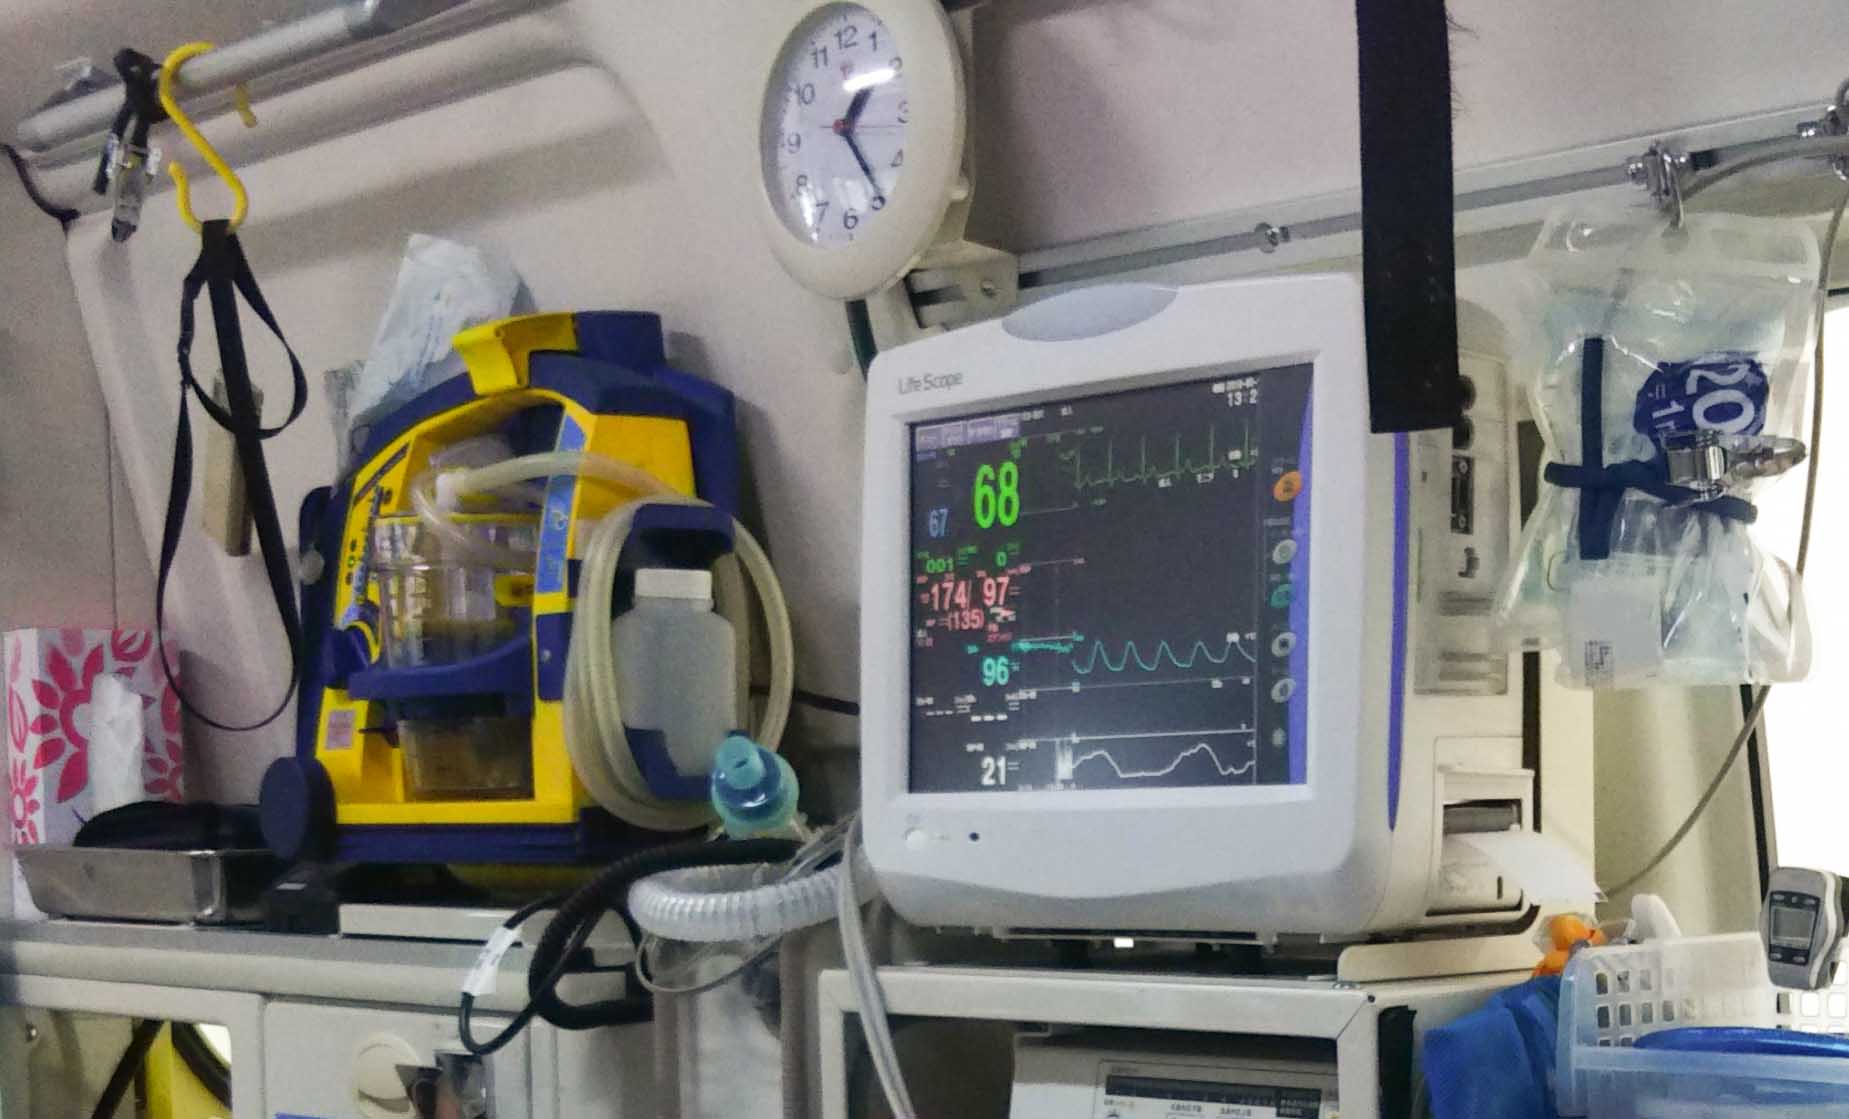 A computer screen in an ambulance showing greenlines that indicate the heartbeat rhythm of a patient.